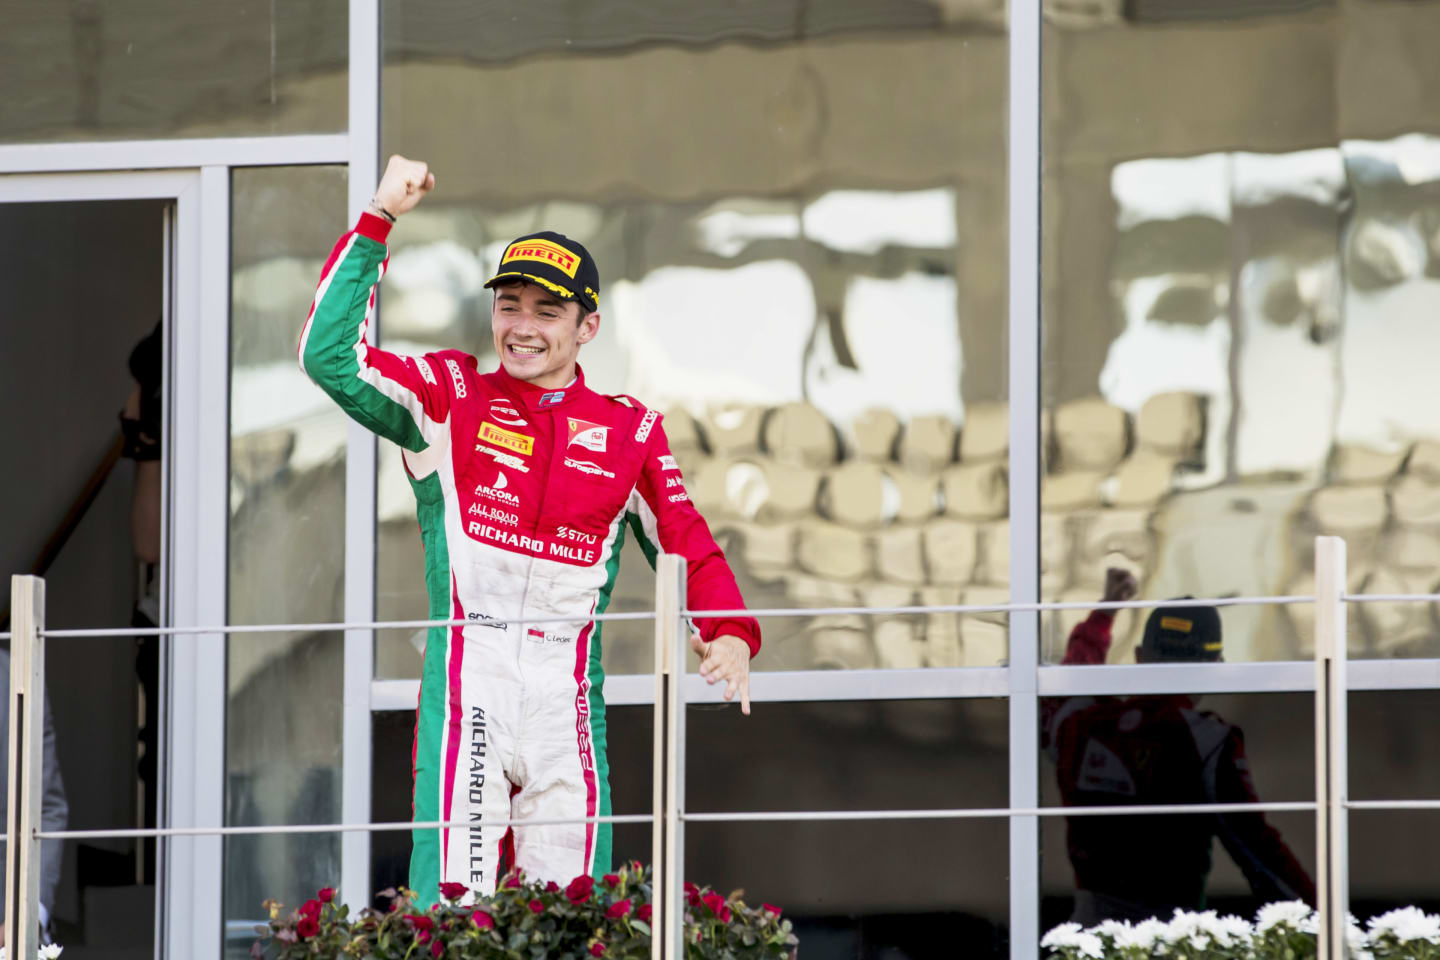 Following GP2’s rechristening as Formula 2, Charles Leclerc became the series’ first champion, taking seven wins to beat Artem Markelov to the title. After making his F1 debut this year with Sauber, for 2019, Leclerc will move to one of the hottest seats on the grid, driving for Ferrari alongside Sebastian Vettel.